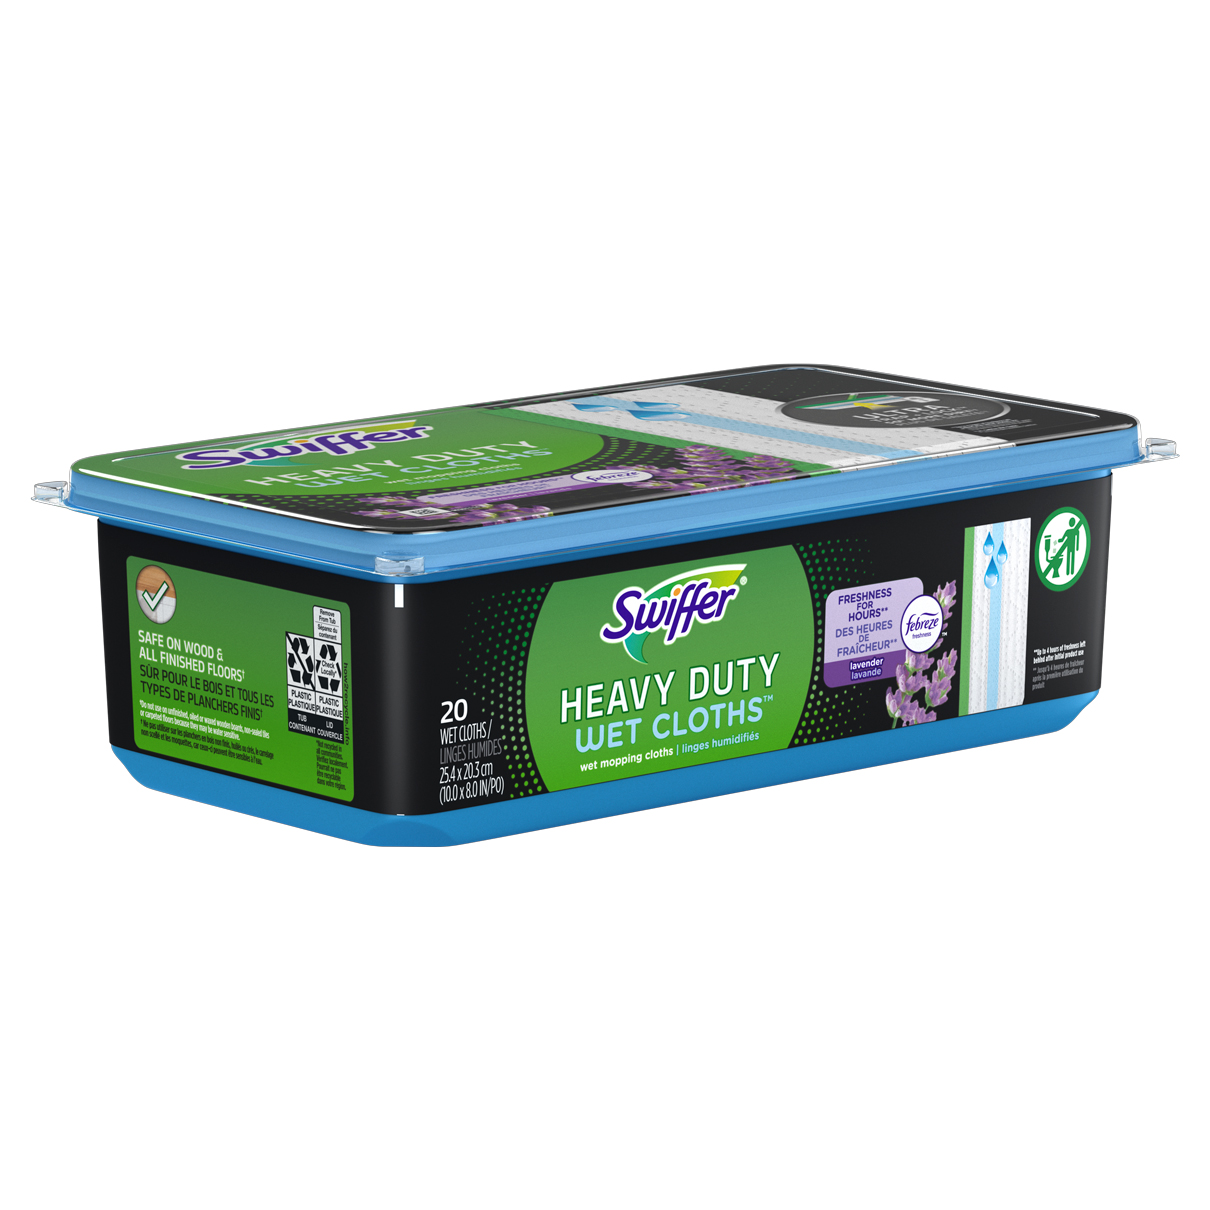 Swiffer® Sweeper™ Heavy Duty Multi-Surface Wet Cloth Refills for Floor  Mopping and Cleaning, Lavender scent